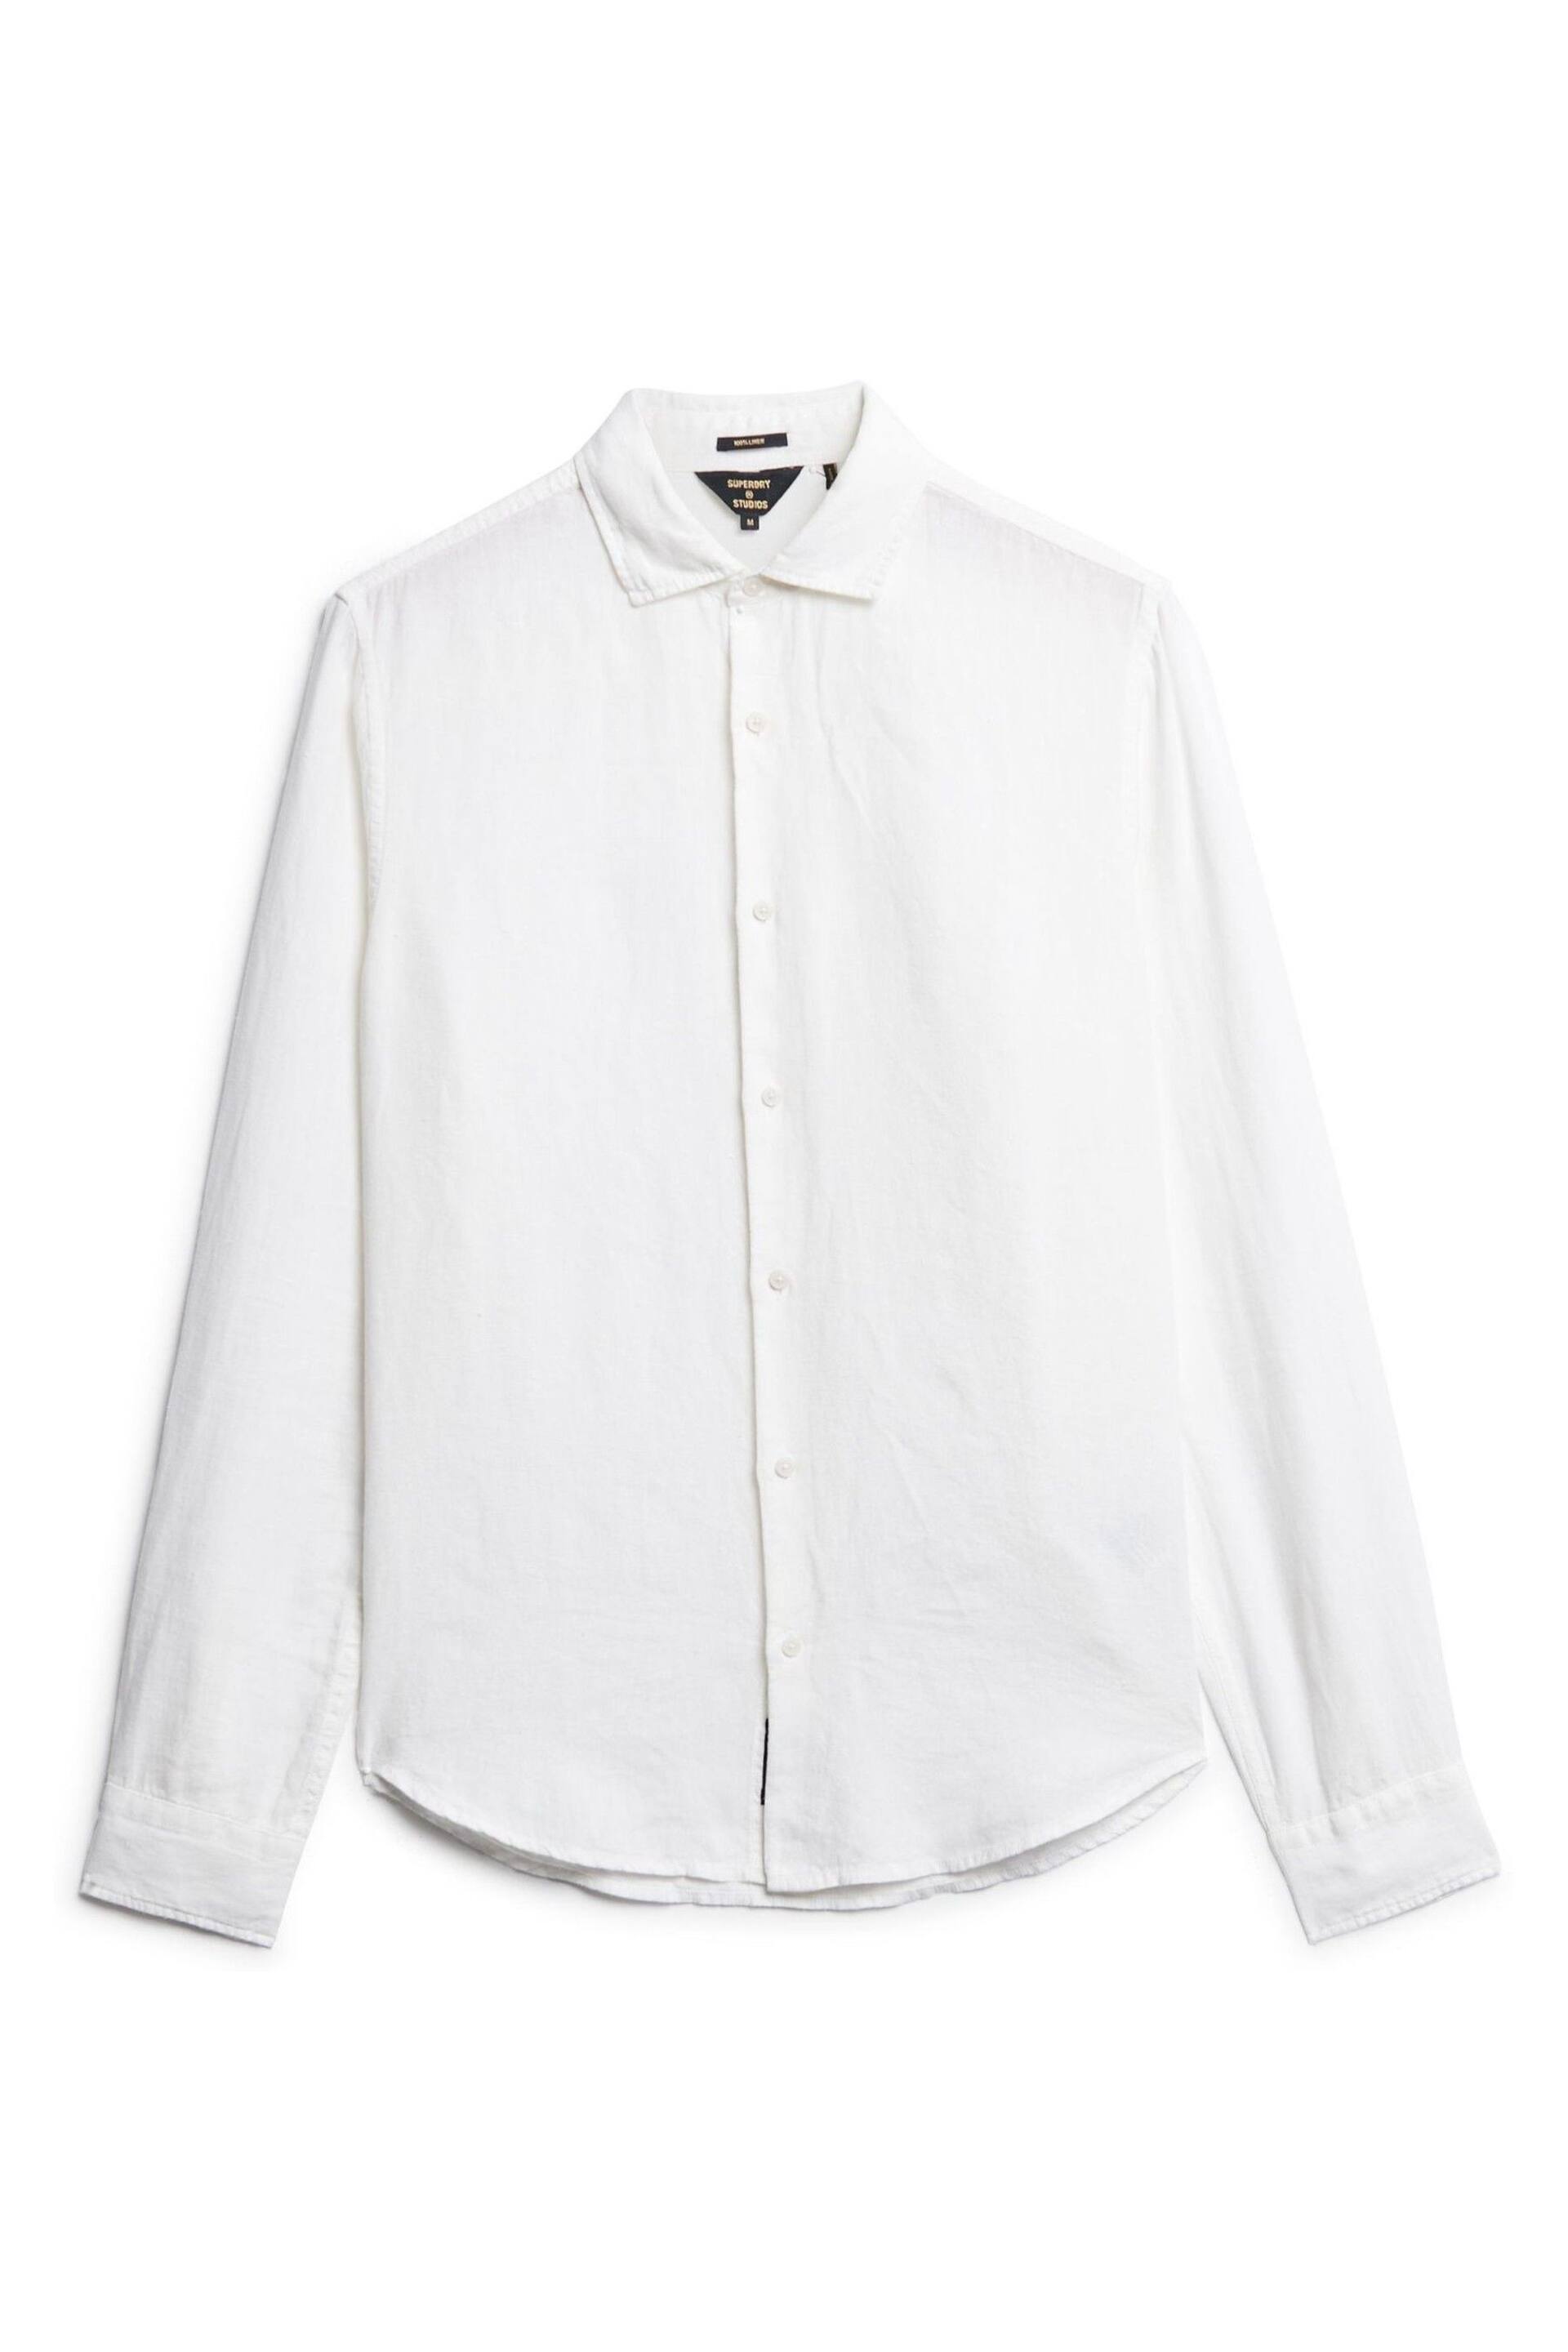 Superdry Optic Studios Casual Linen Long Sleeved Shirt - Image 5 of 7